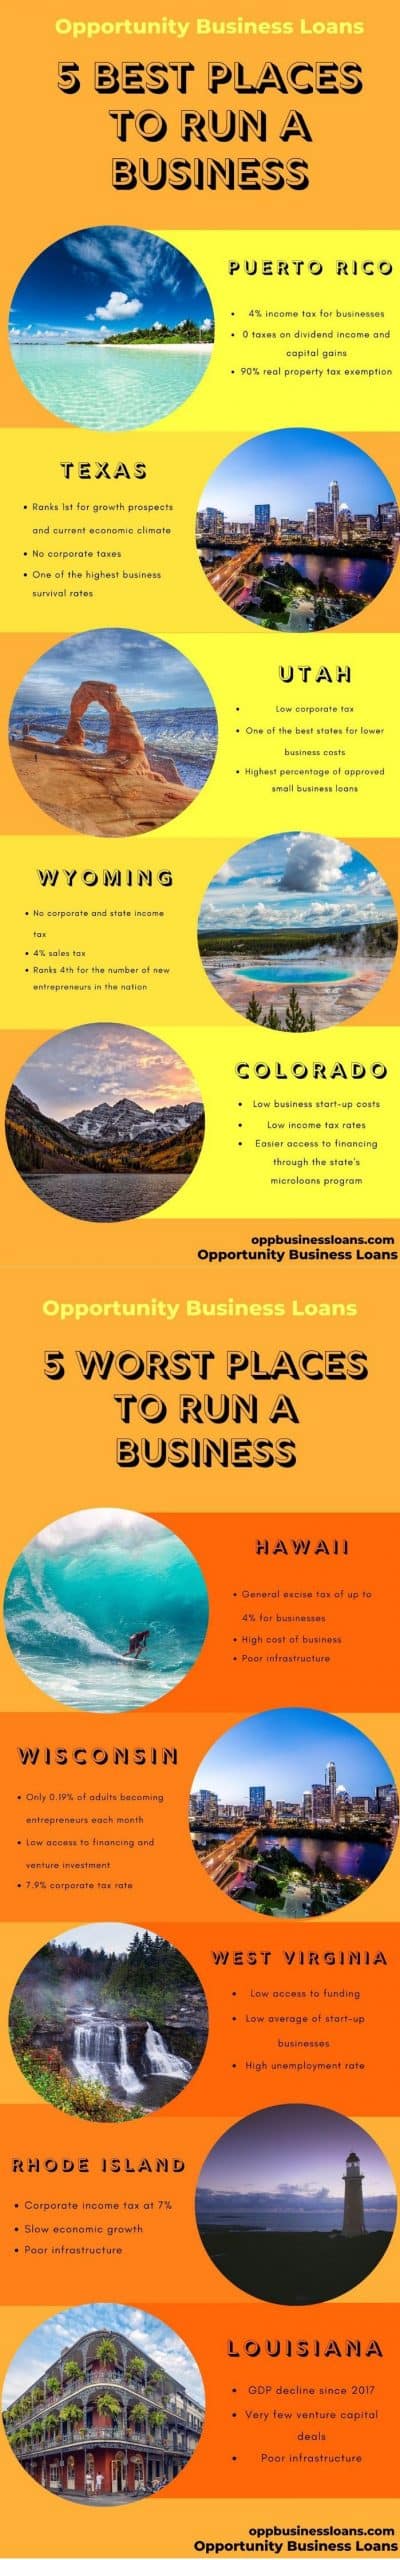 Opportunity Business Loans Infographic